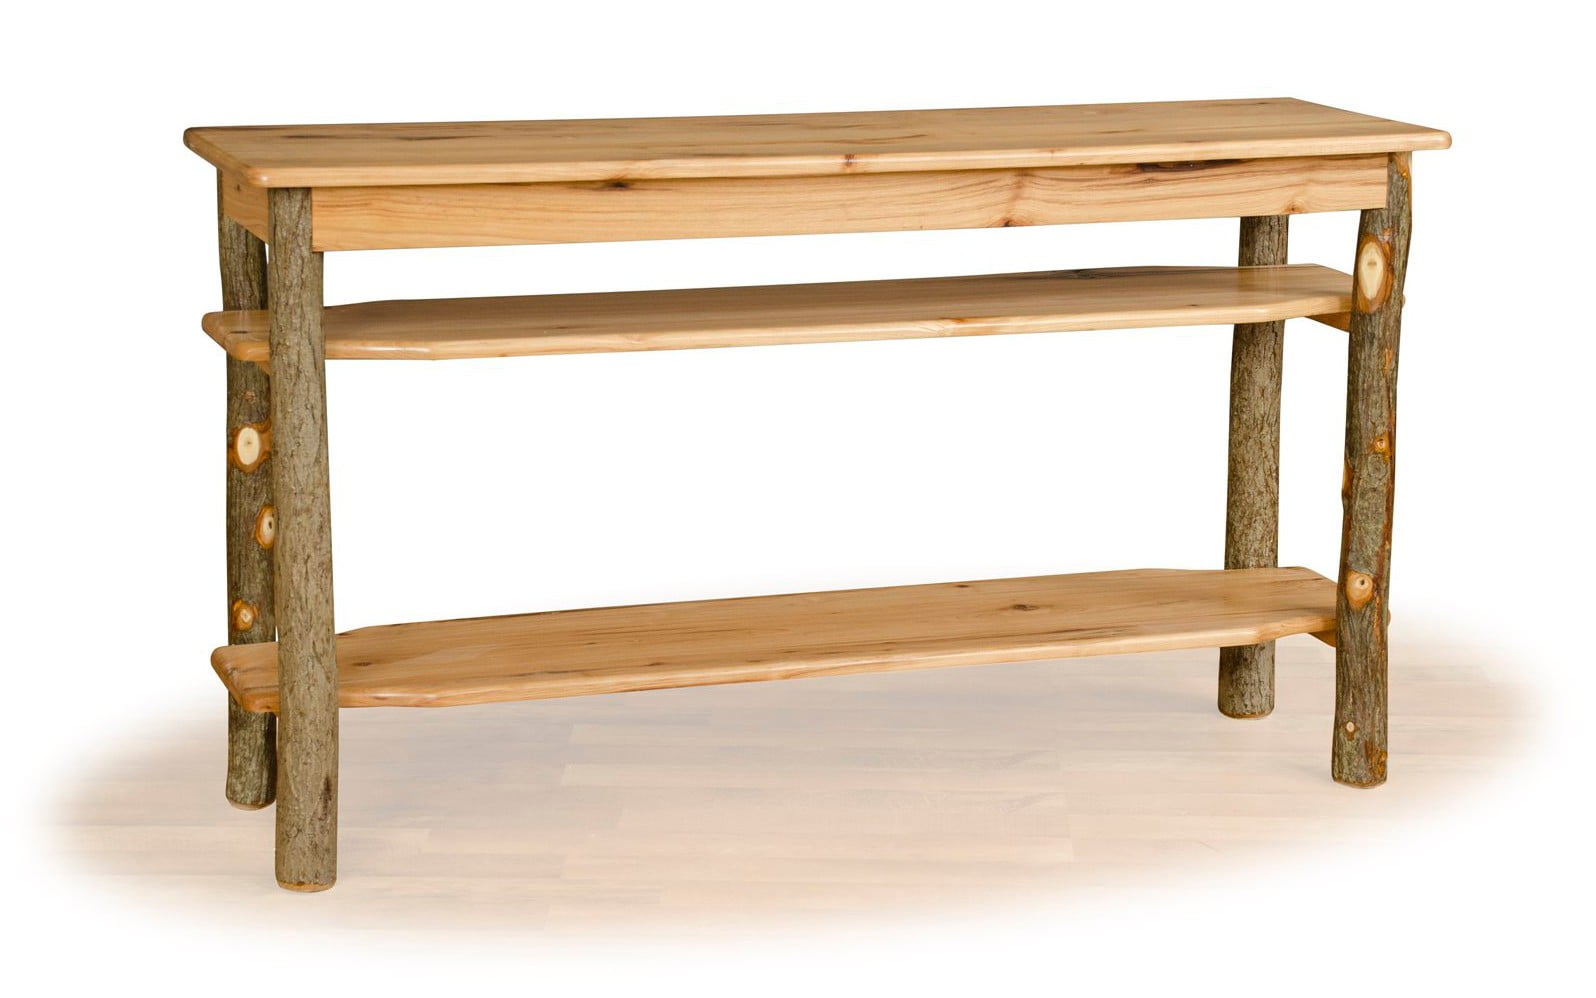 Rustic Hickory Sofa Table / TV Stand – Hickory & Oak or All Hickory